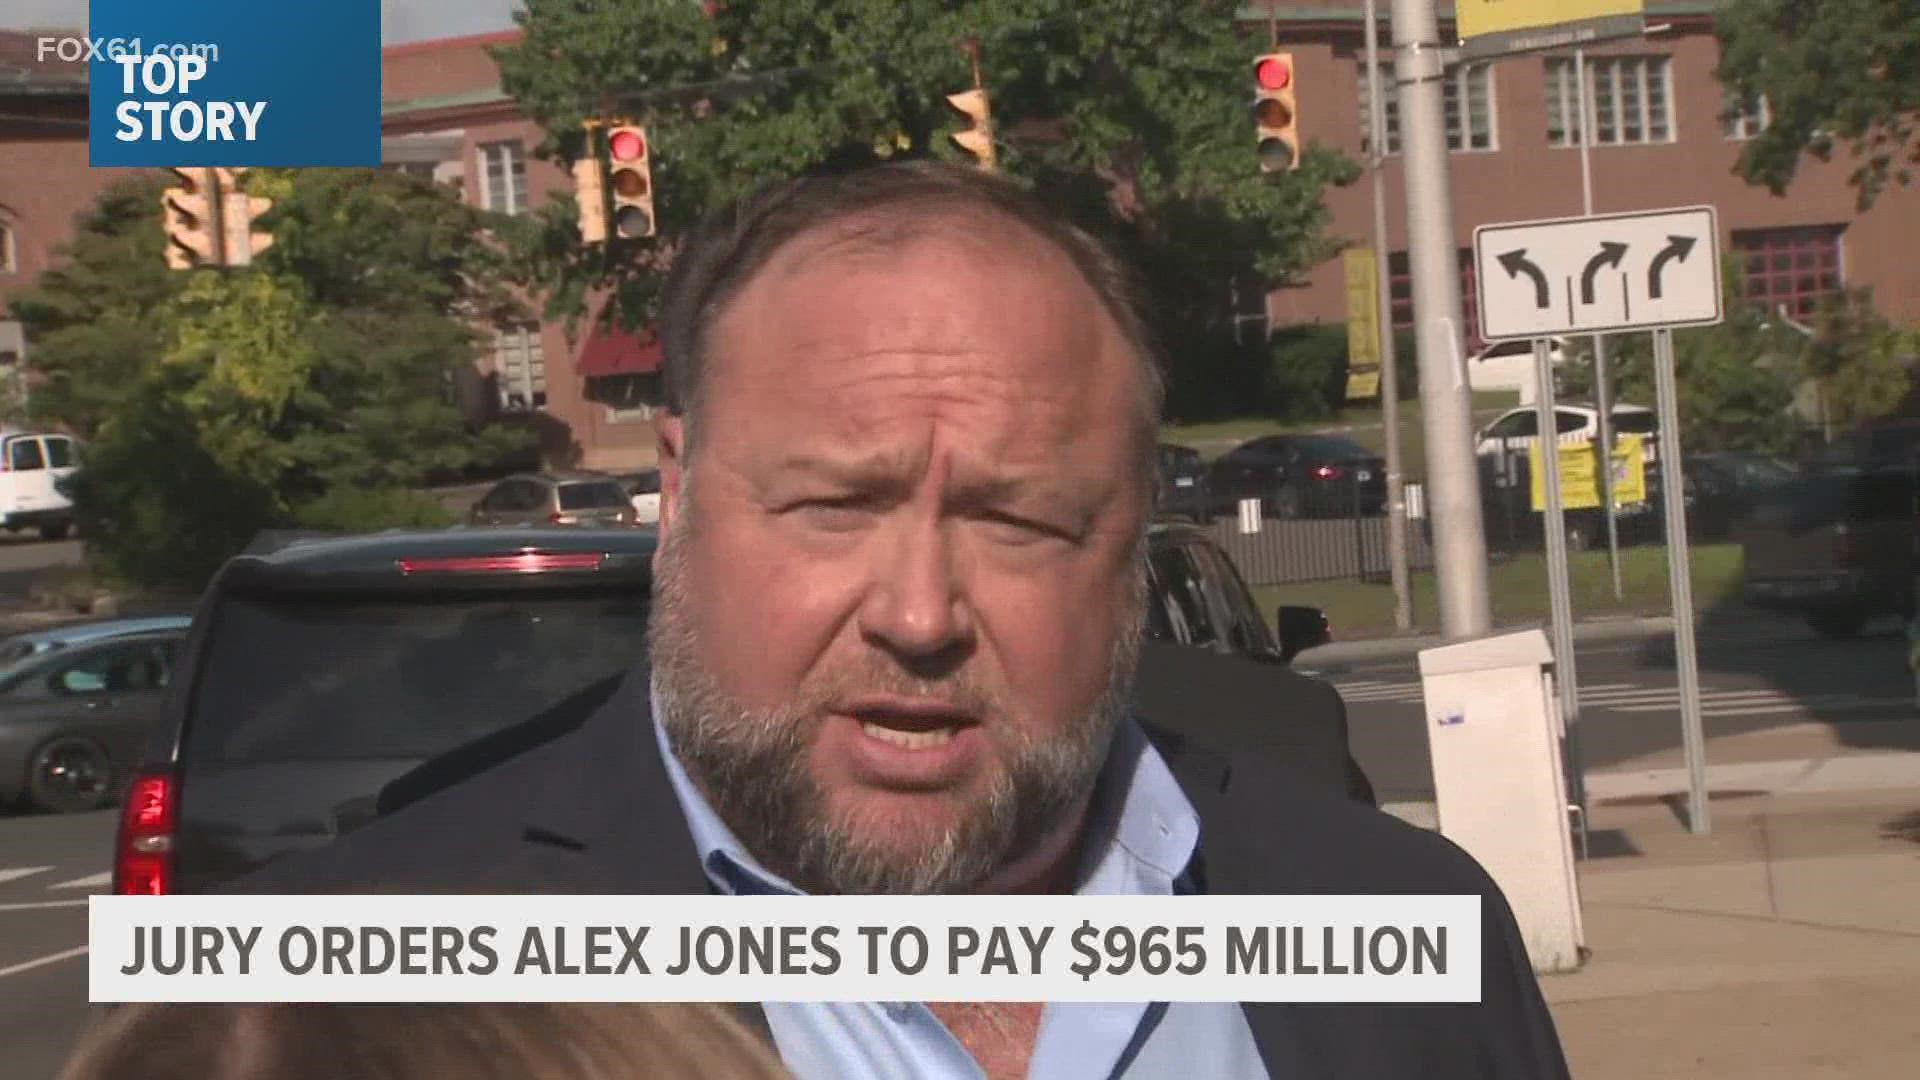 15 people were a part of the lawsuit claiming the lies Alex Jones and his company Free Speech Systems spread after the 2012 shooting at Sandy Hook Elementary.